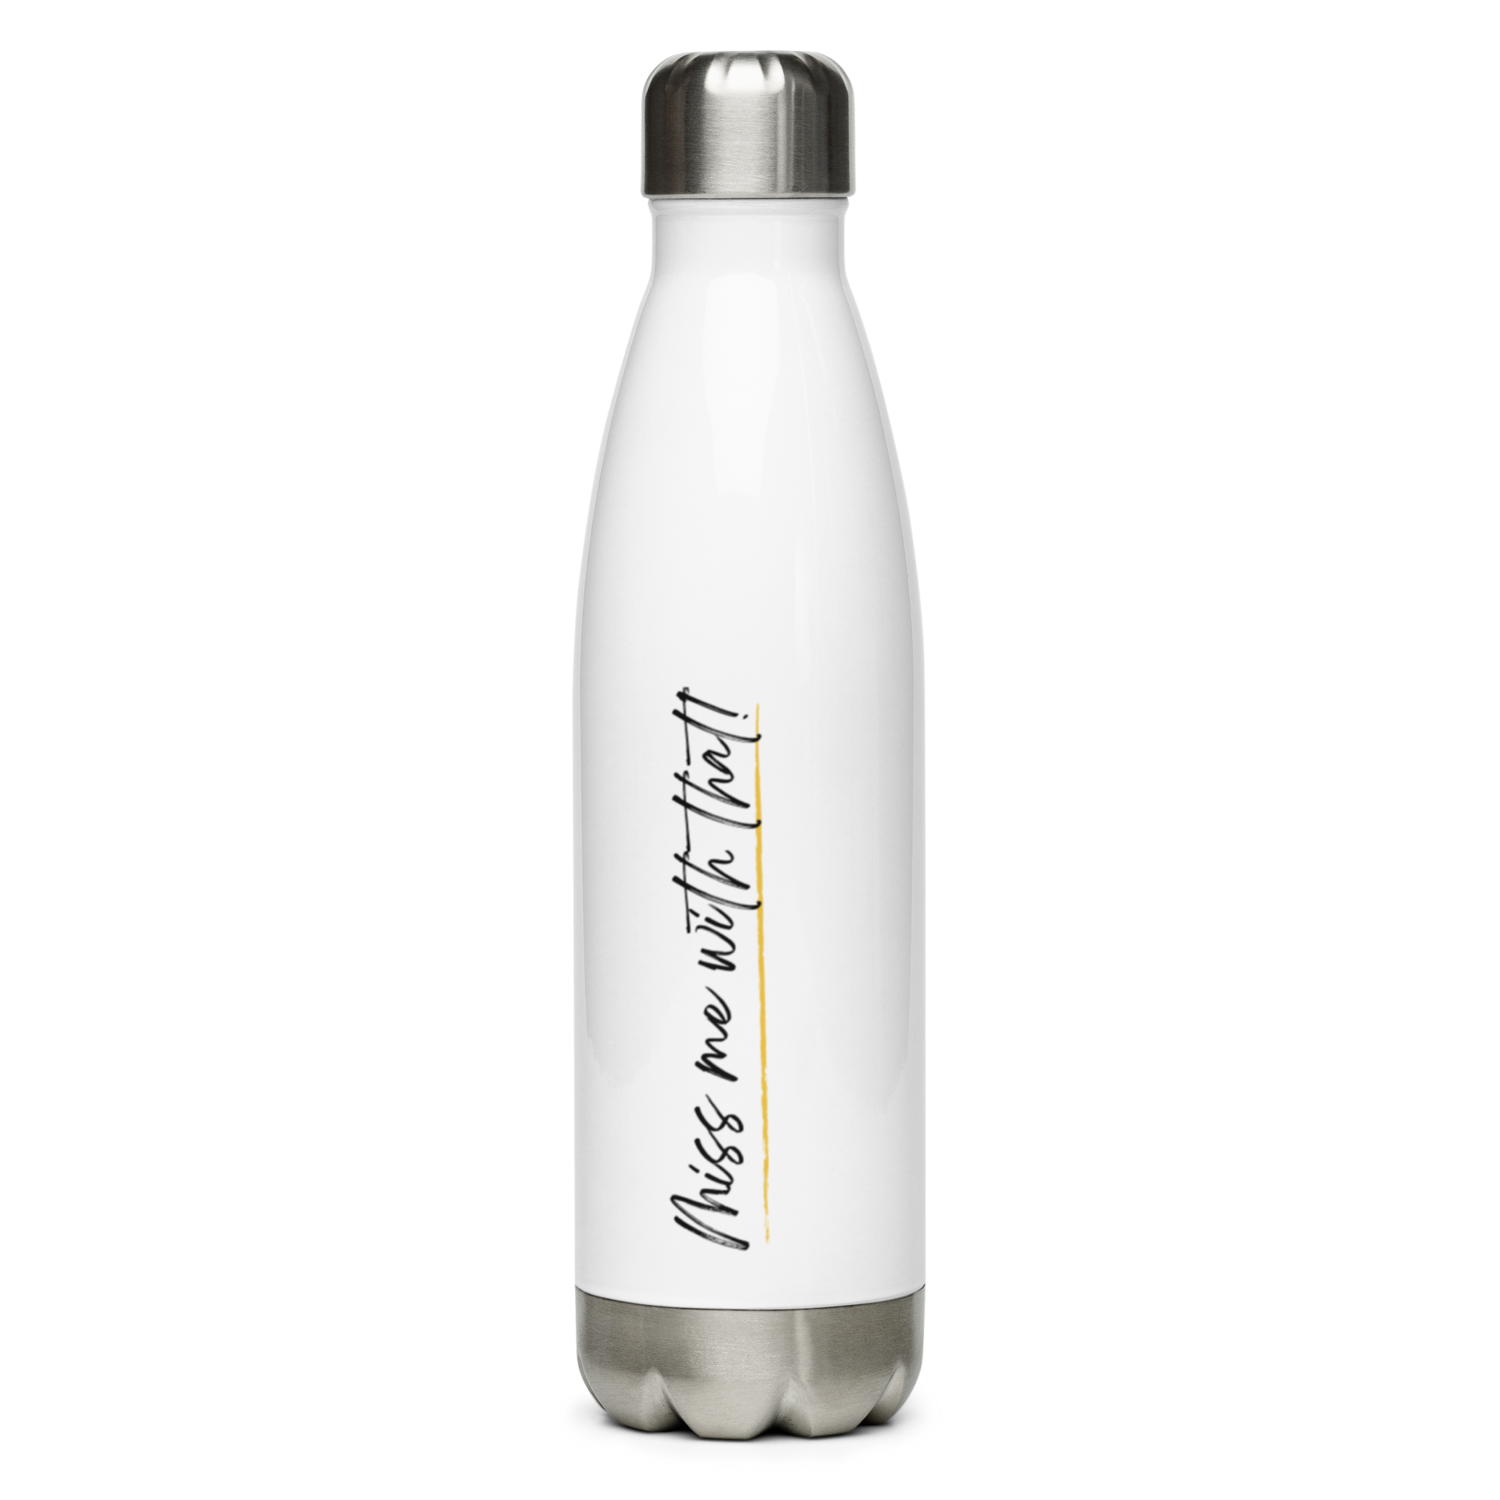 Exclusive Release: Miss Me with That! Steel Water Bottle